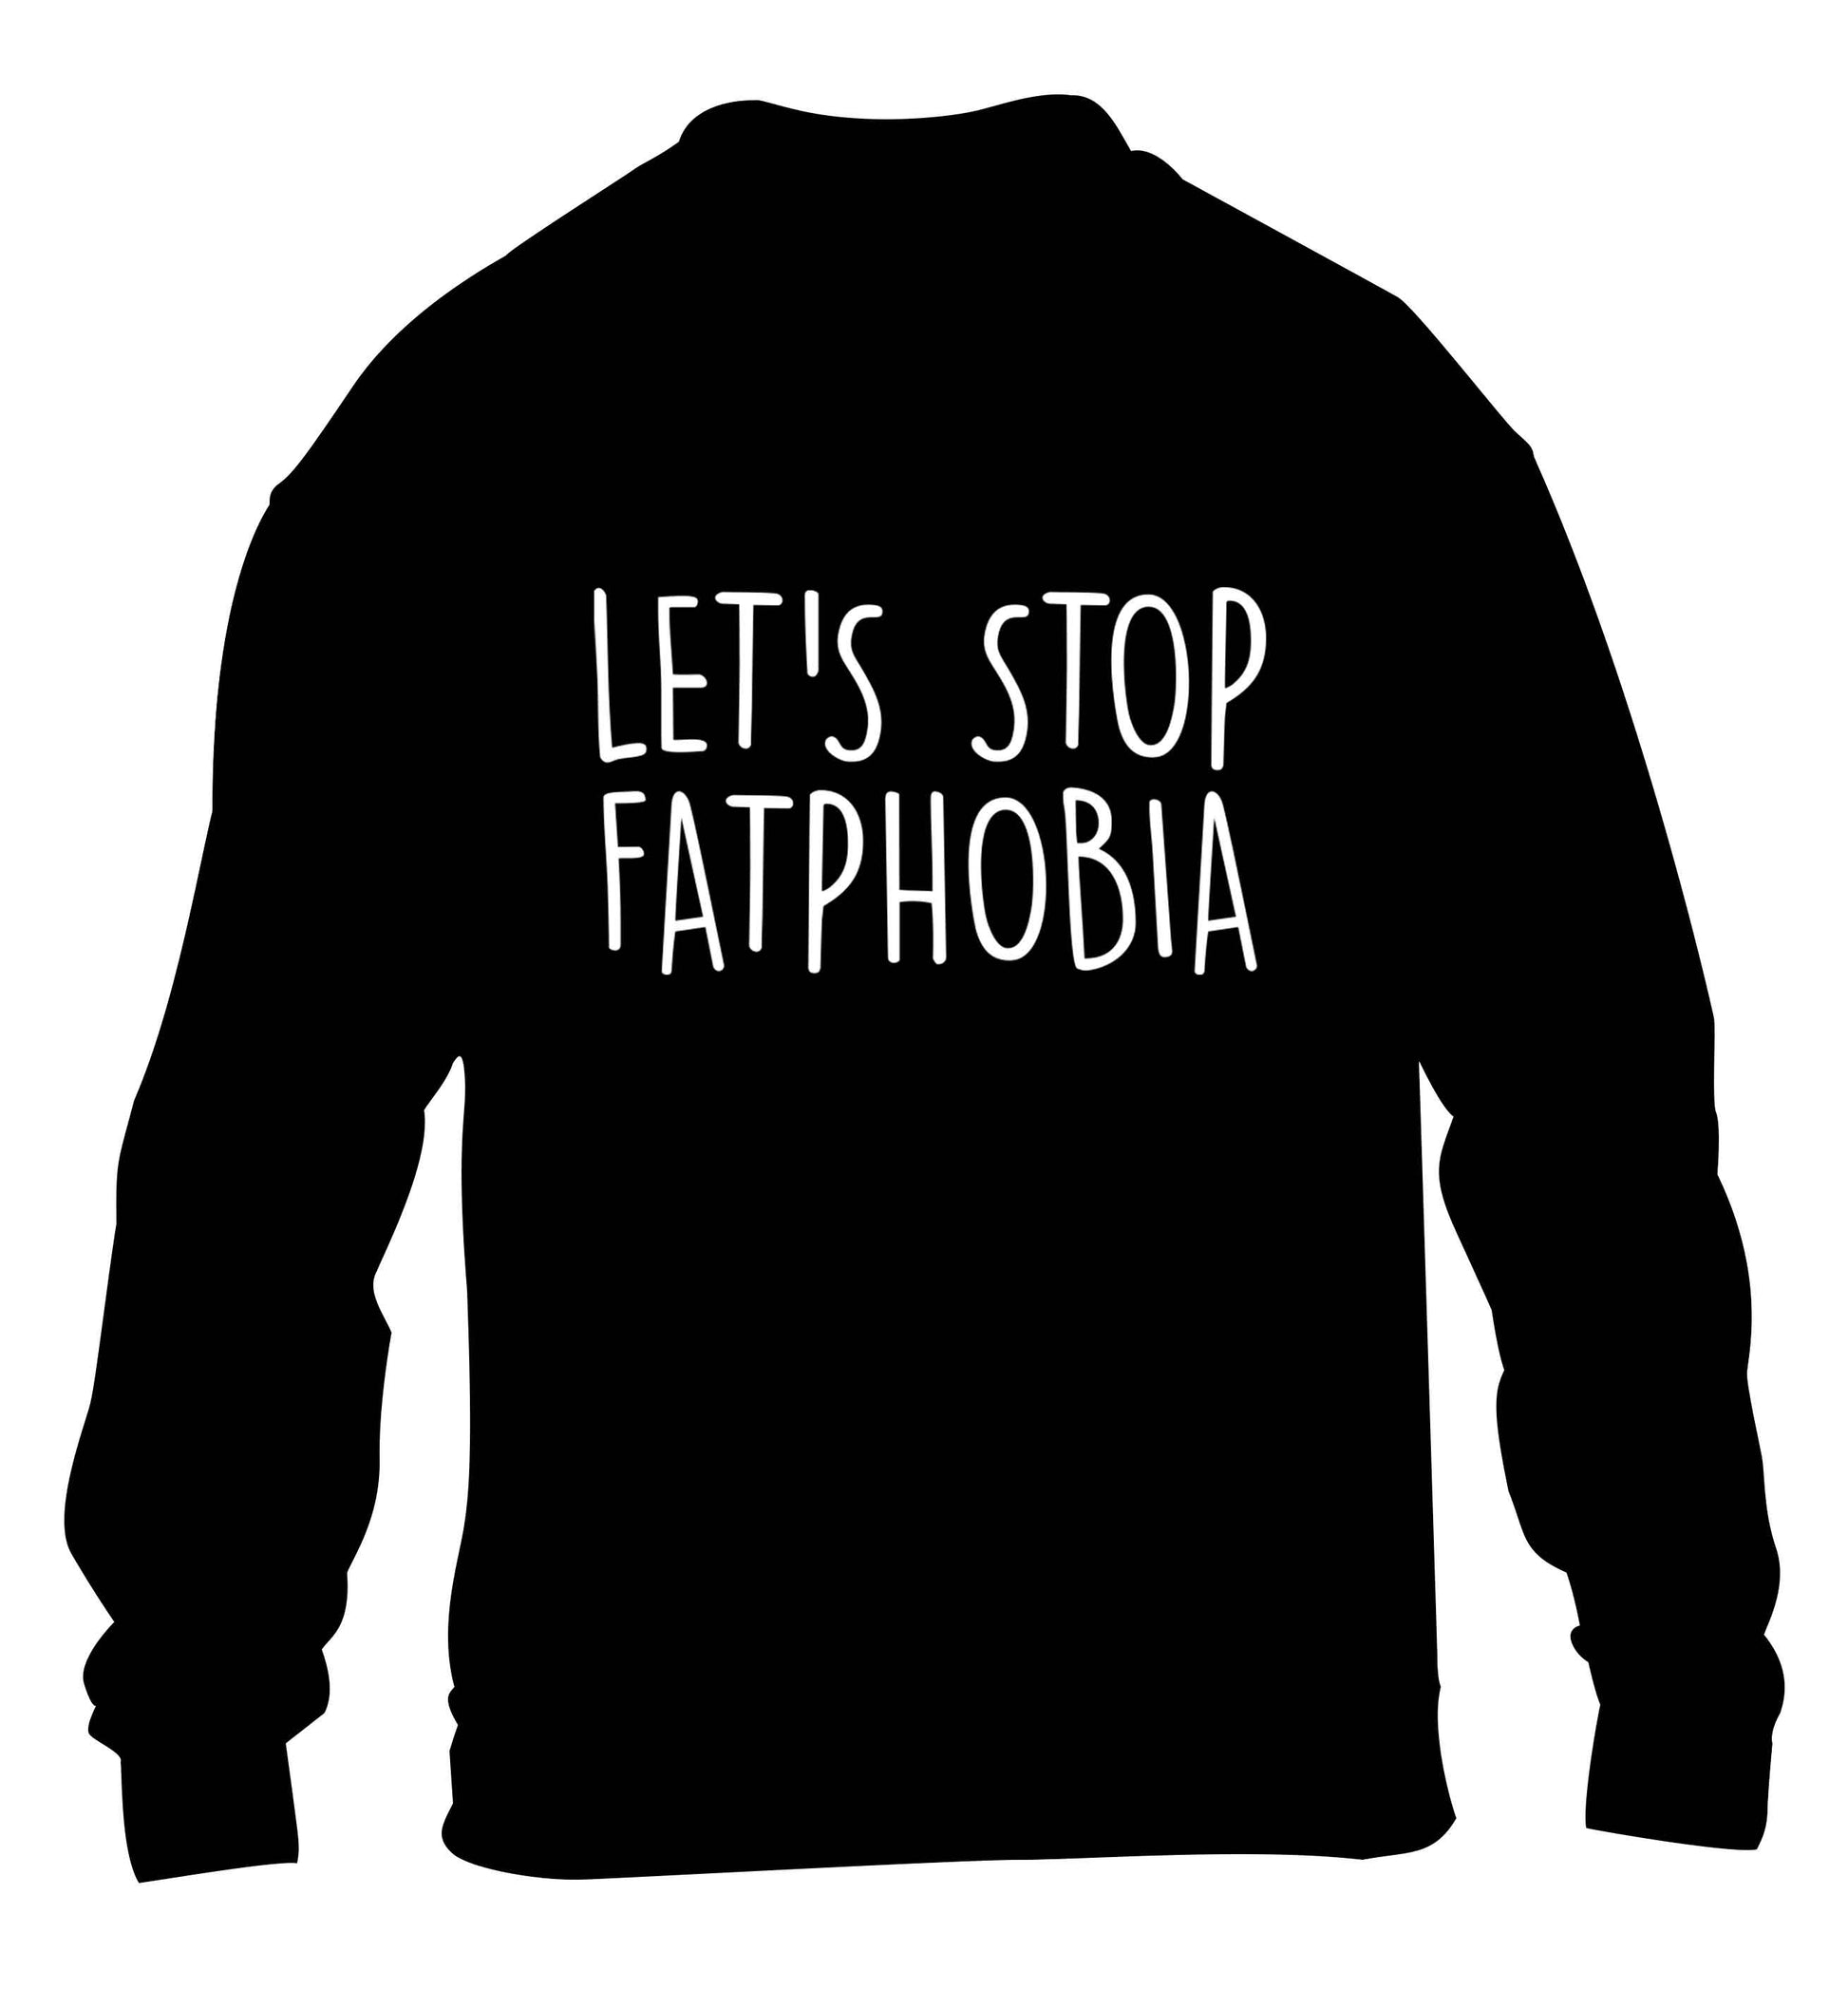 Let's stop fatphobia children's black sweater 12-13 Years